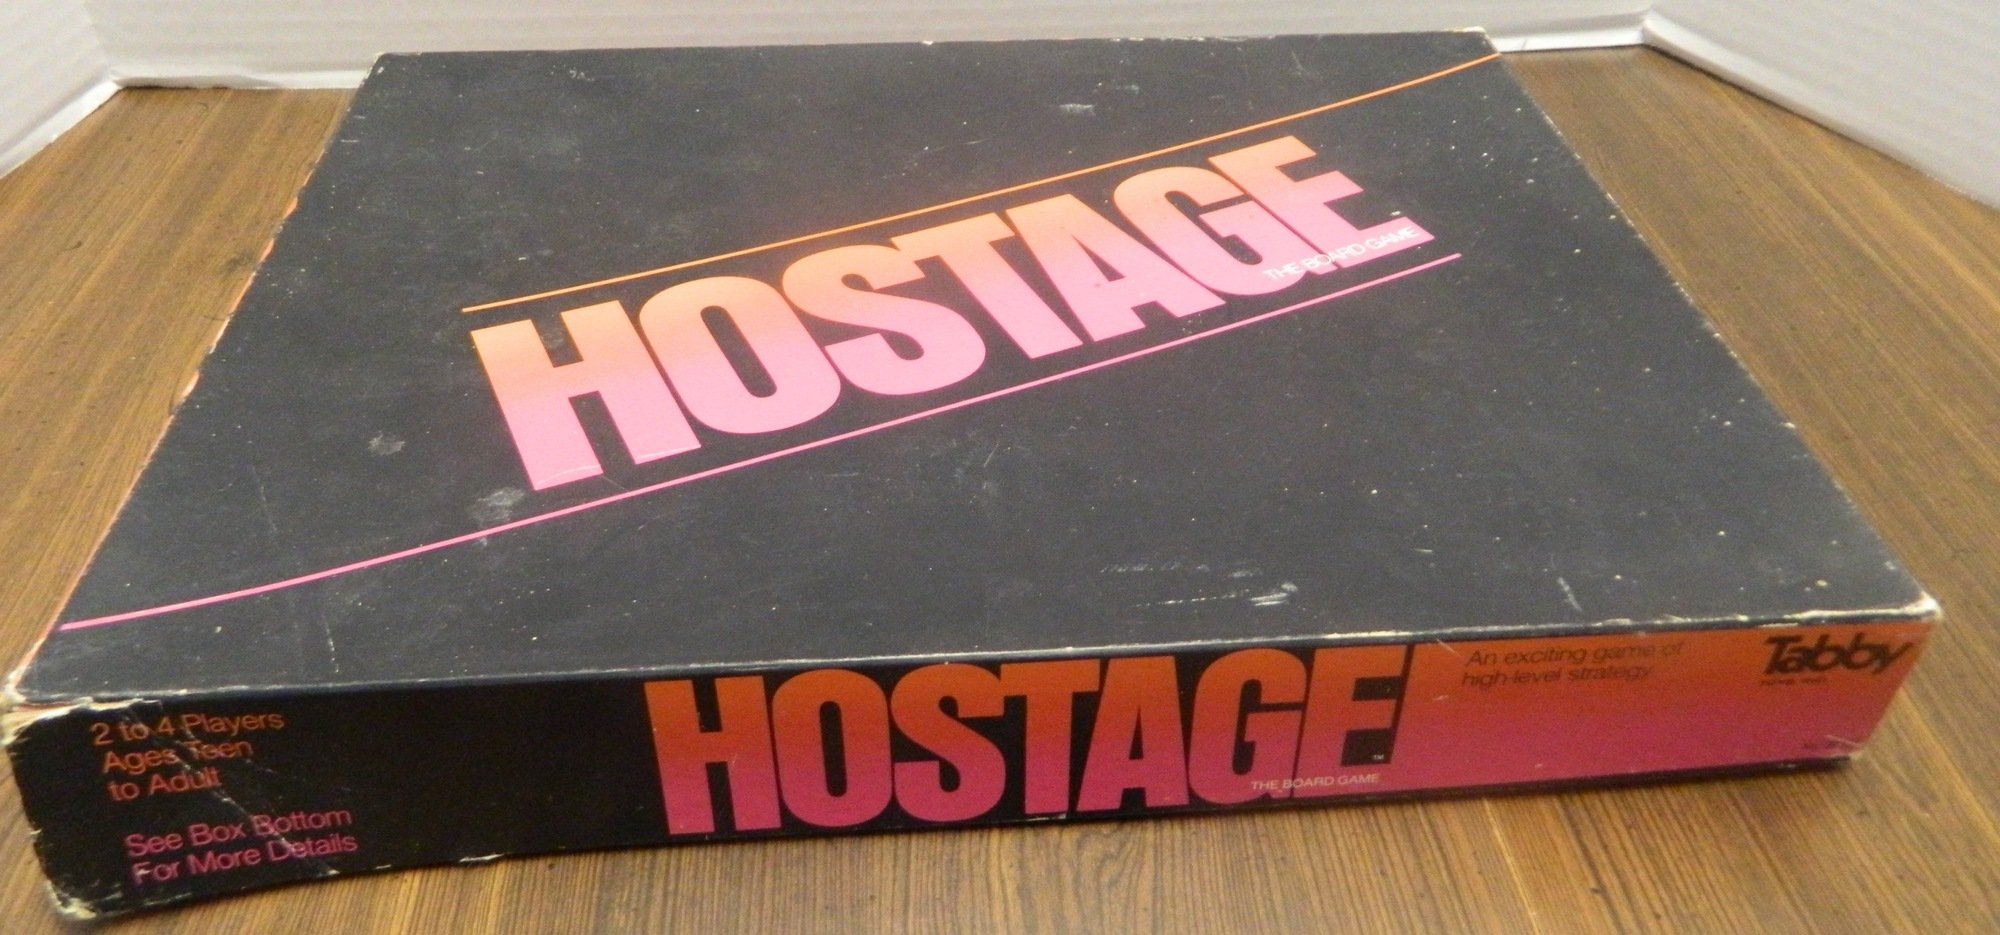 Hostage Board Game Review